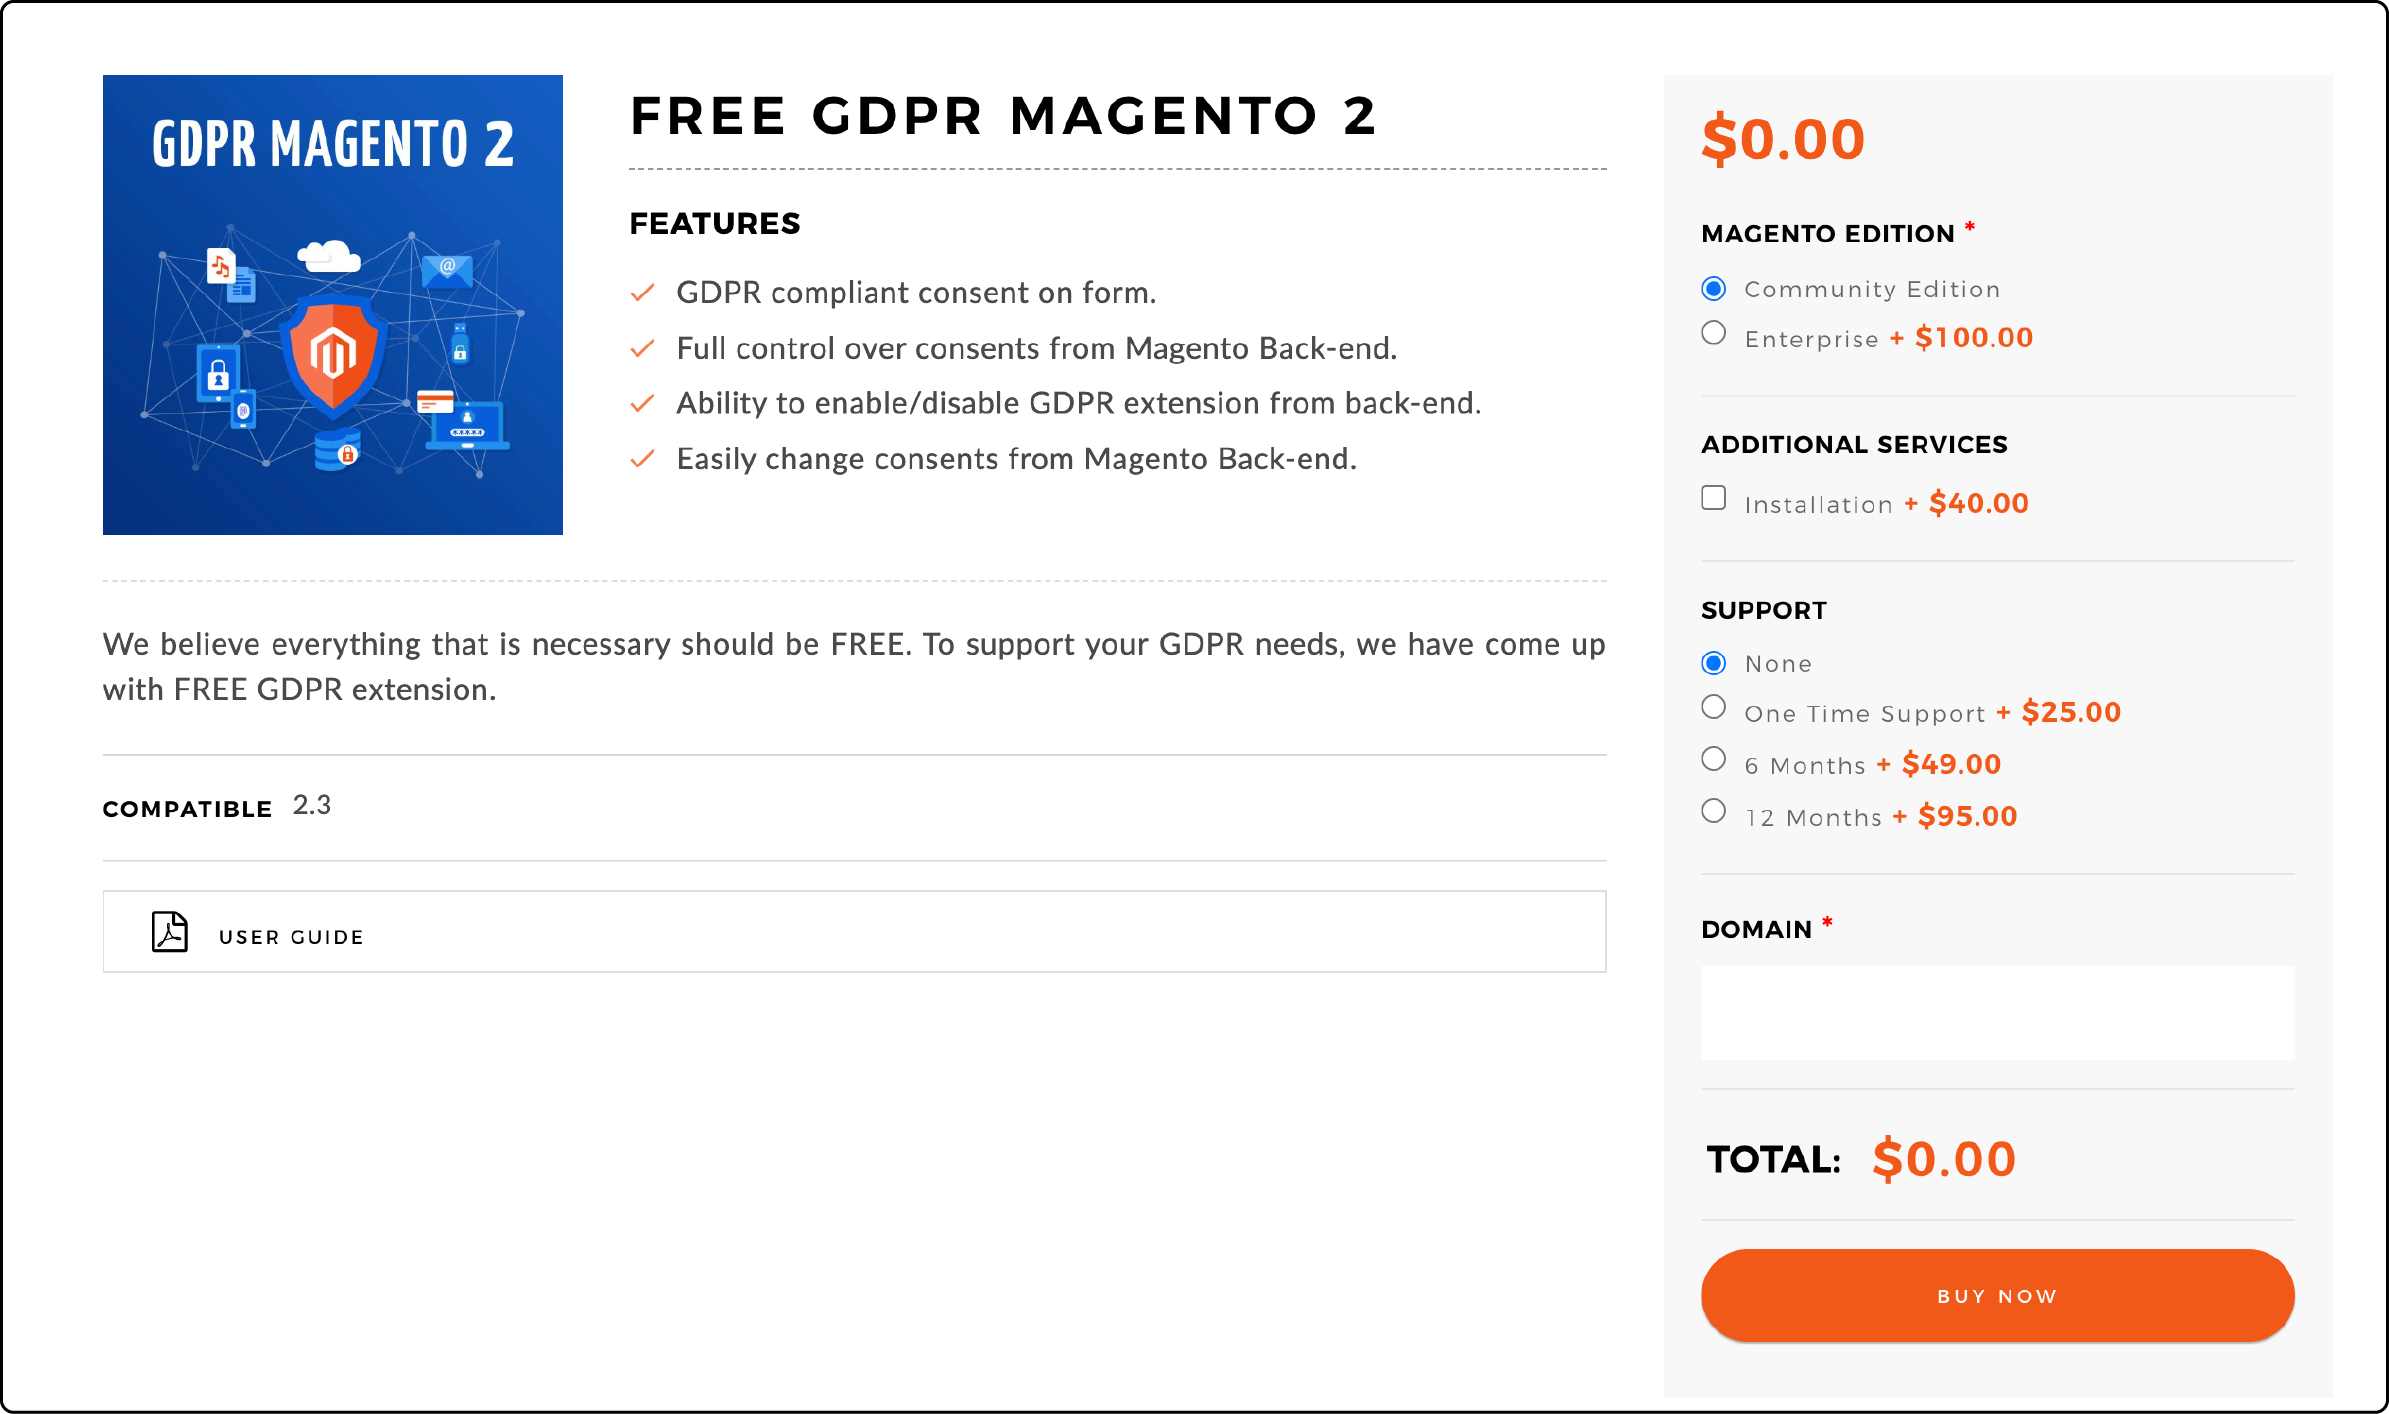 MagentiCity's Free GDPR Extension dashboard for Magento 2